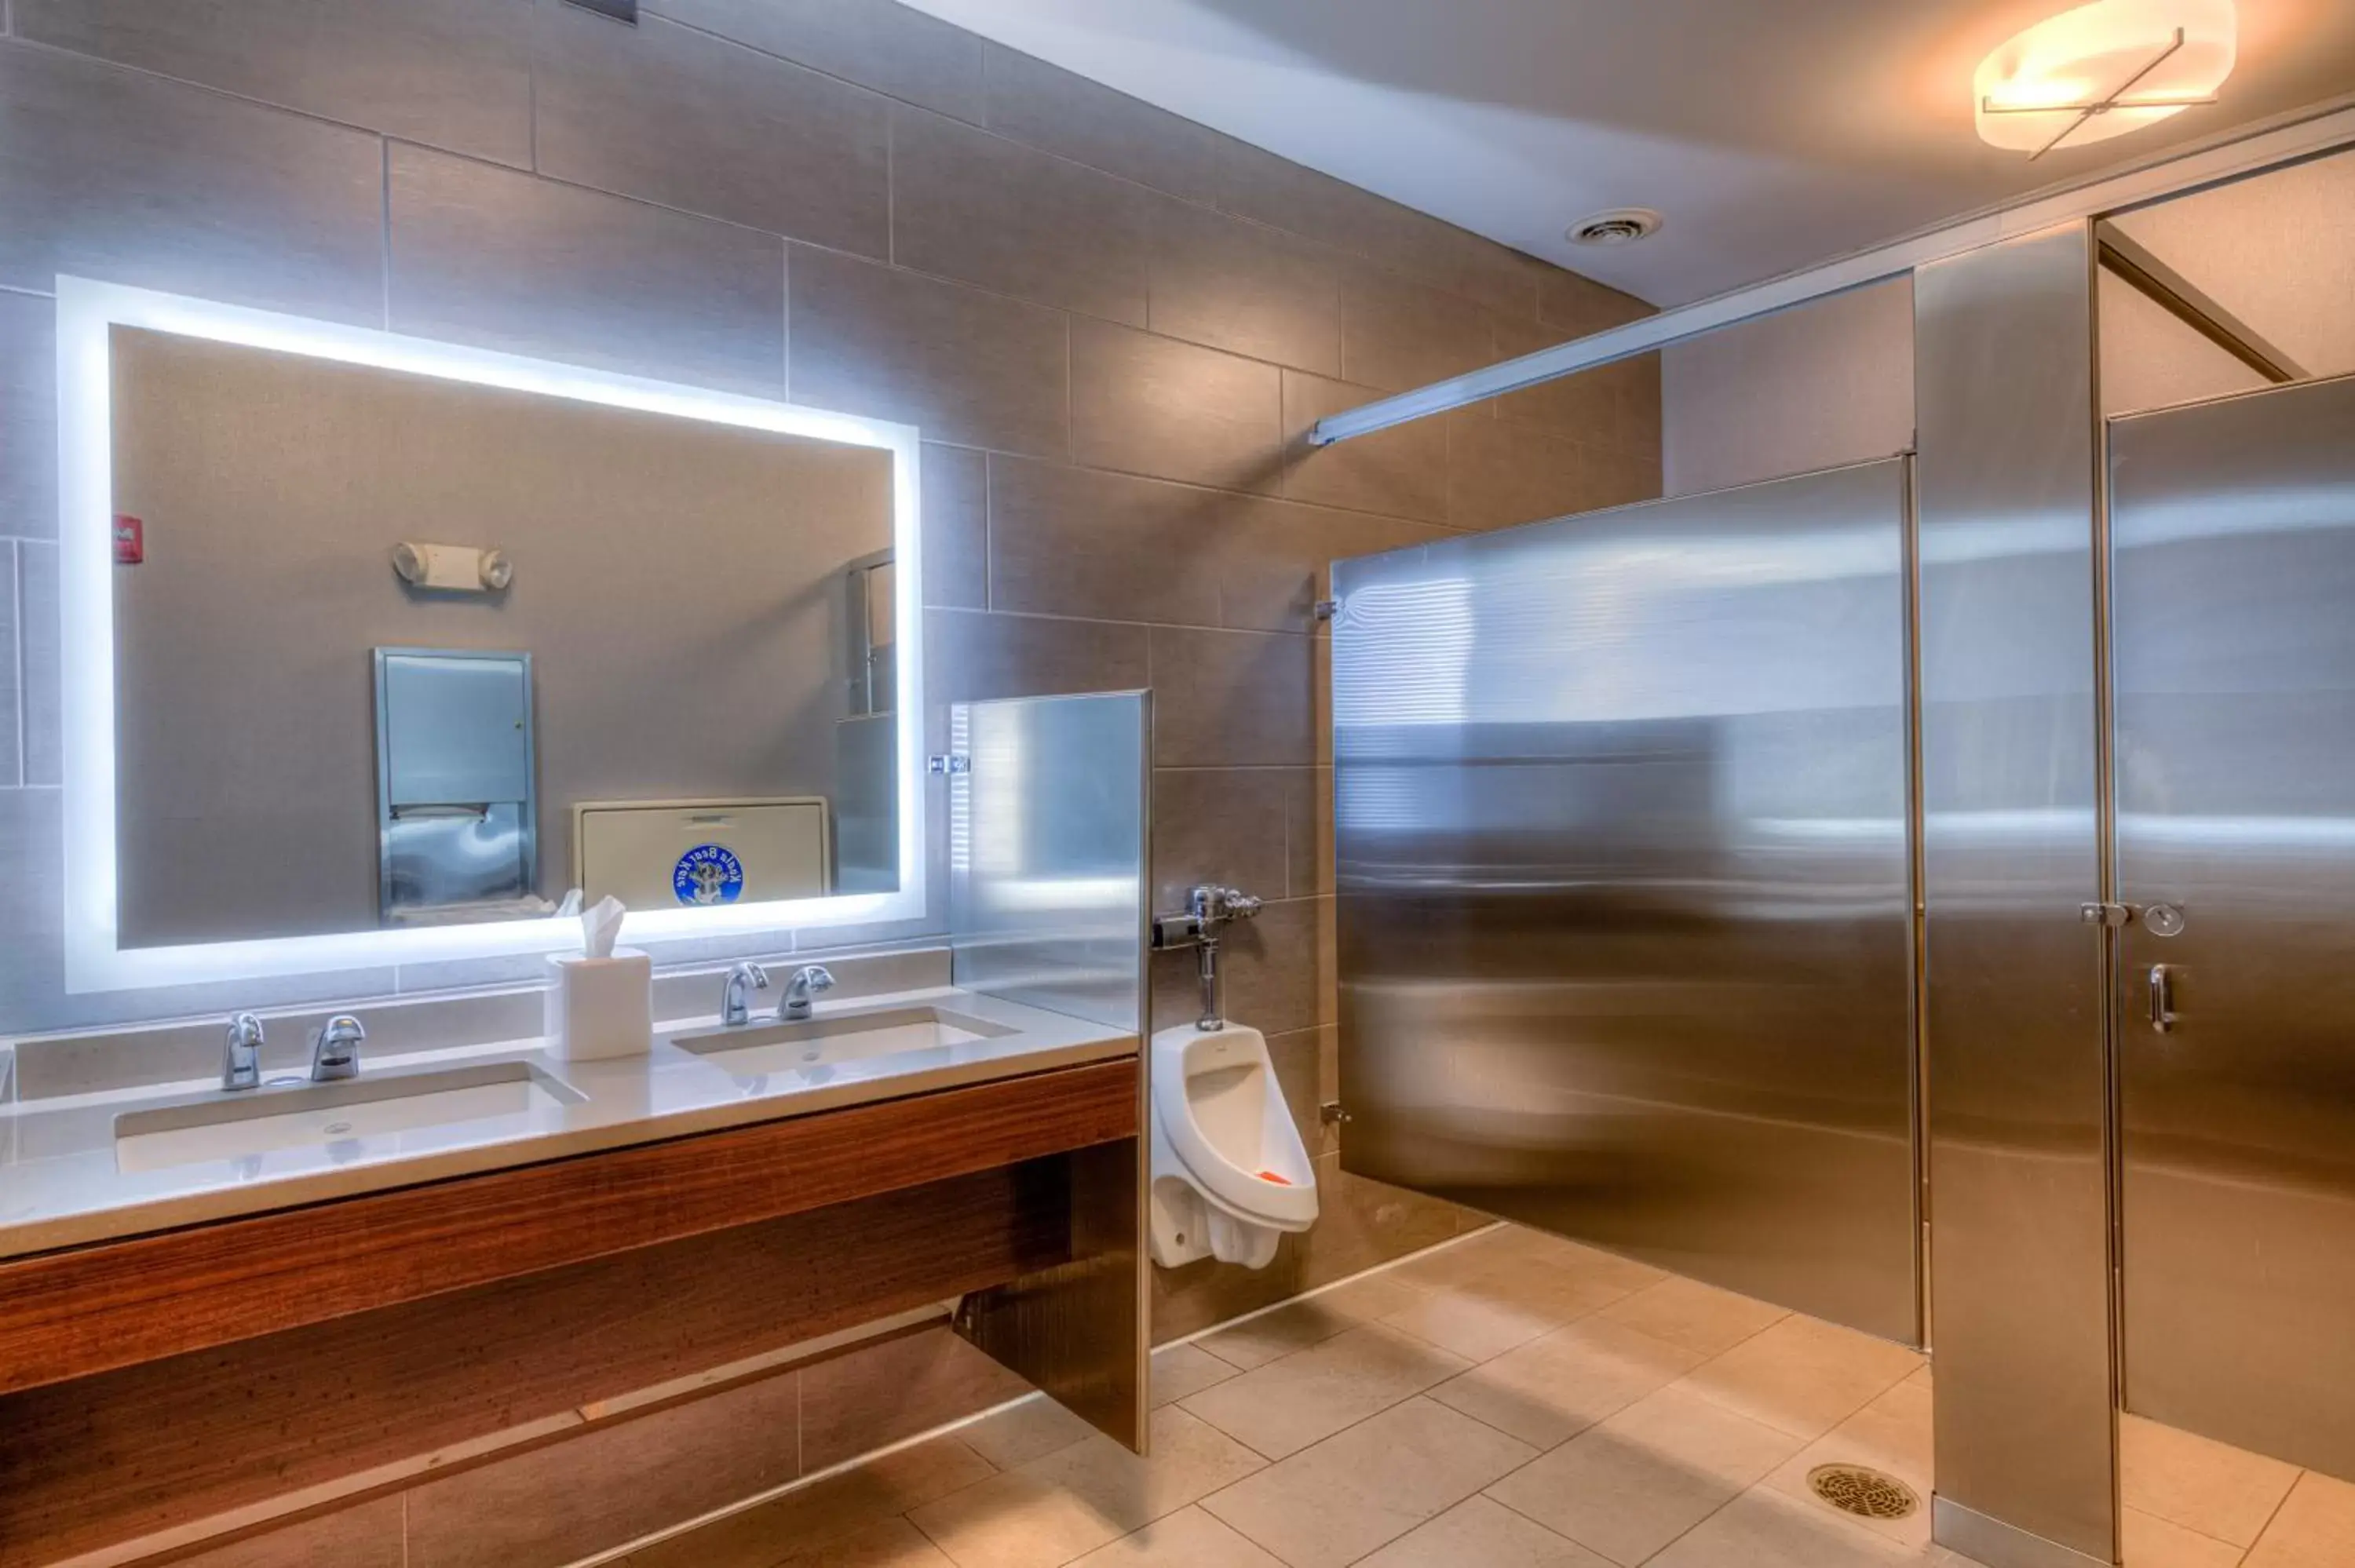 Bathroom in Country Inn & Suites by Radisson, Crystal Lake, IL